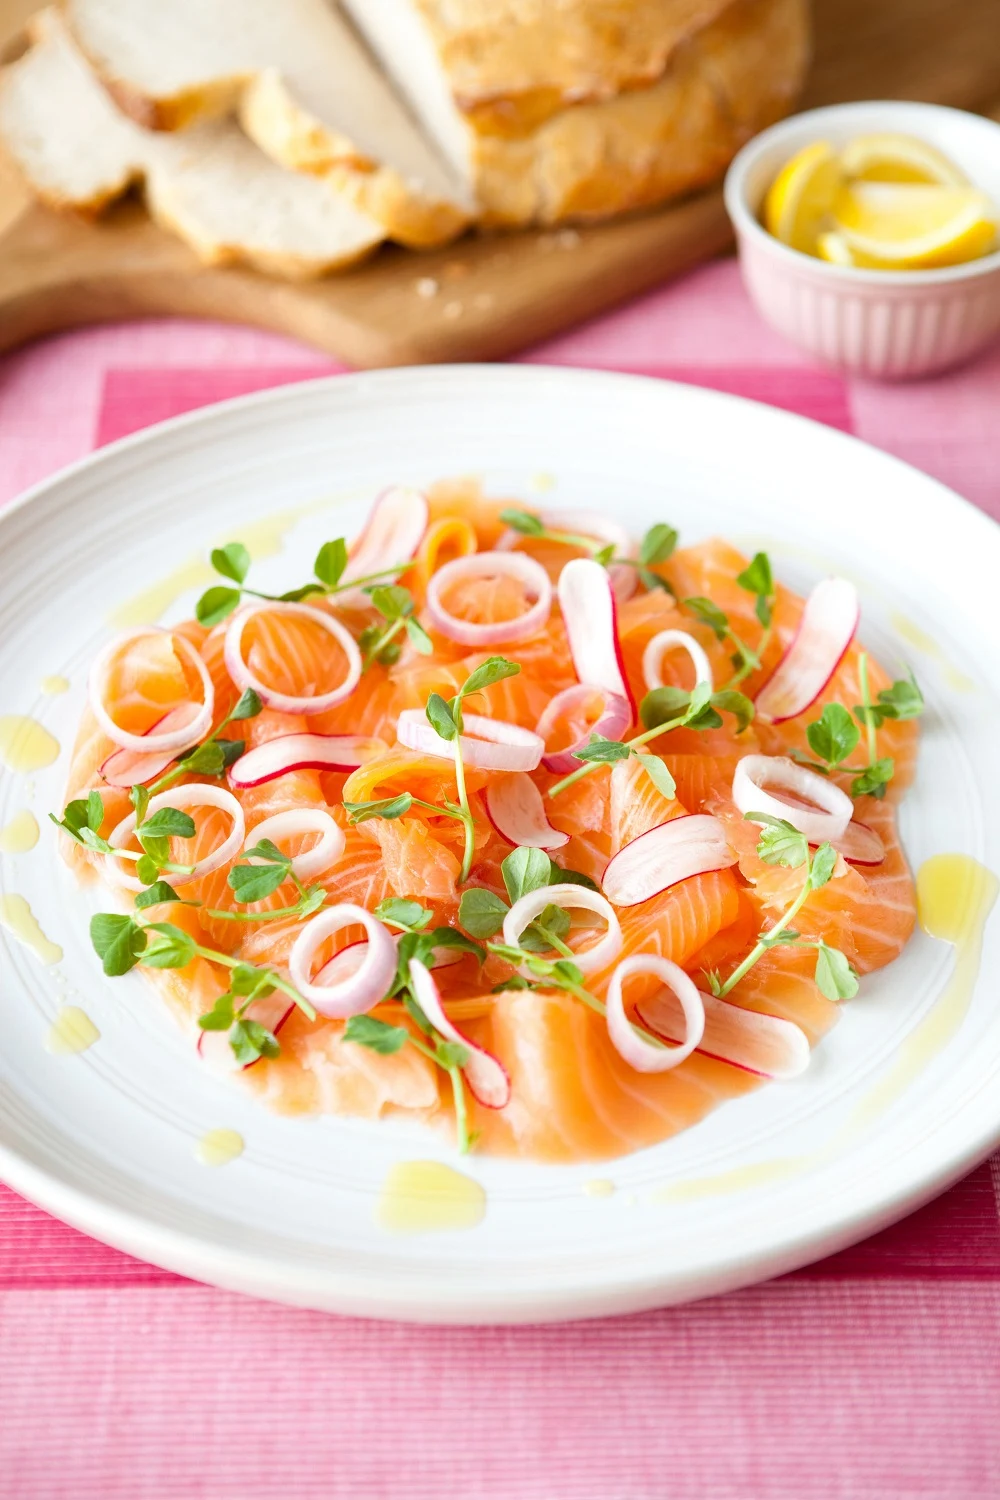 Organic Smoked Salmon With Sweet and Sour Shallots, Radishes And Lemon Scented Olive Oil